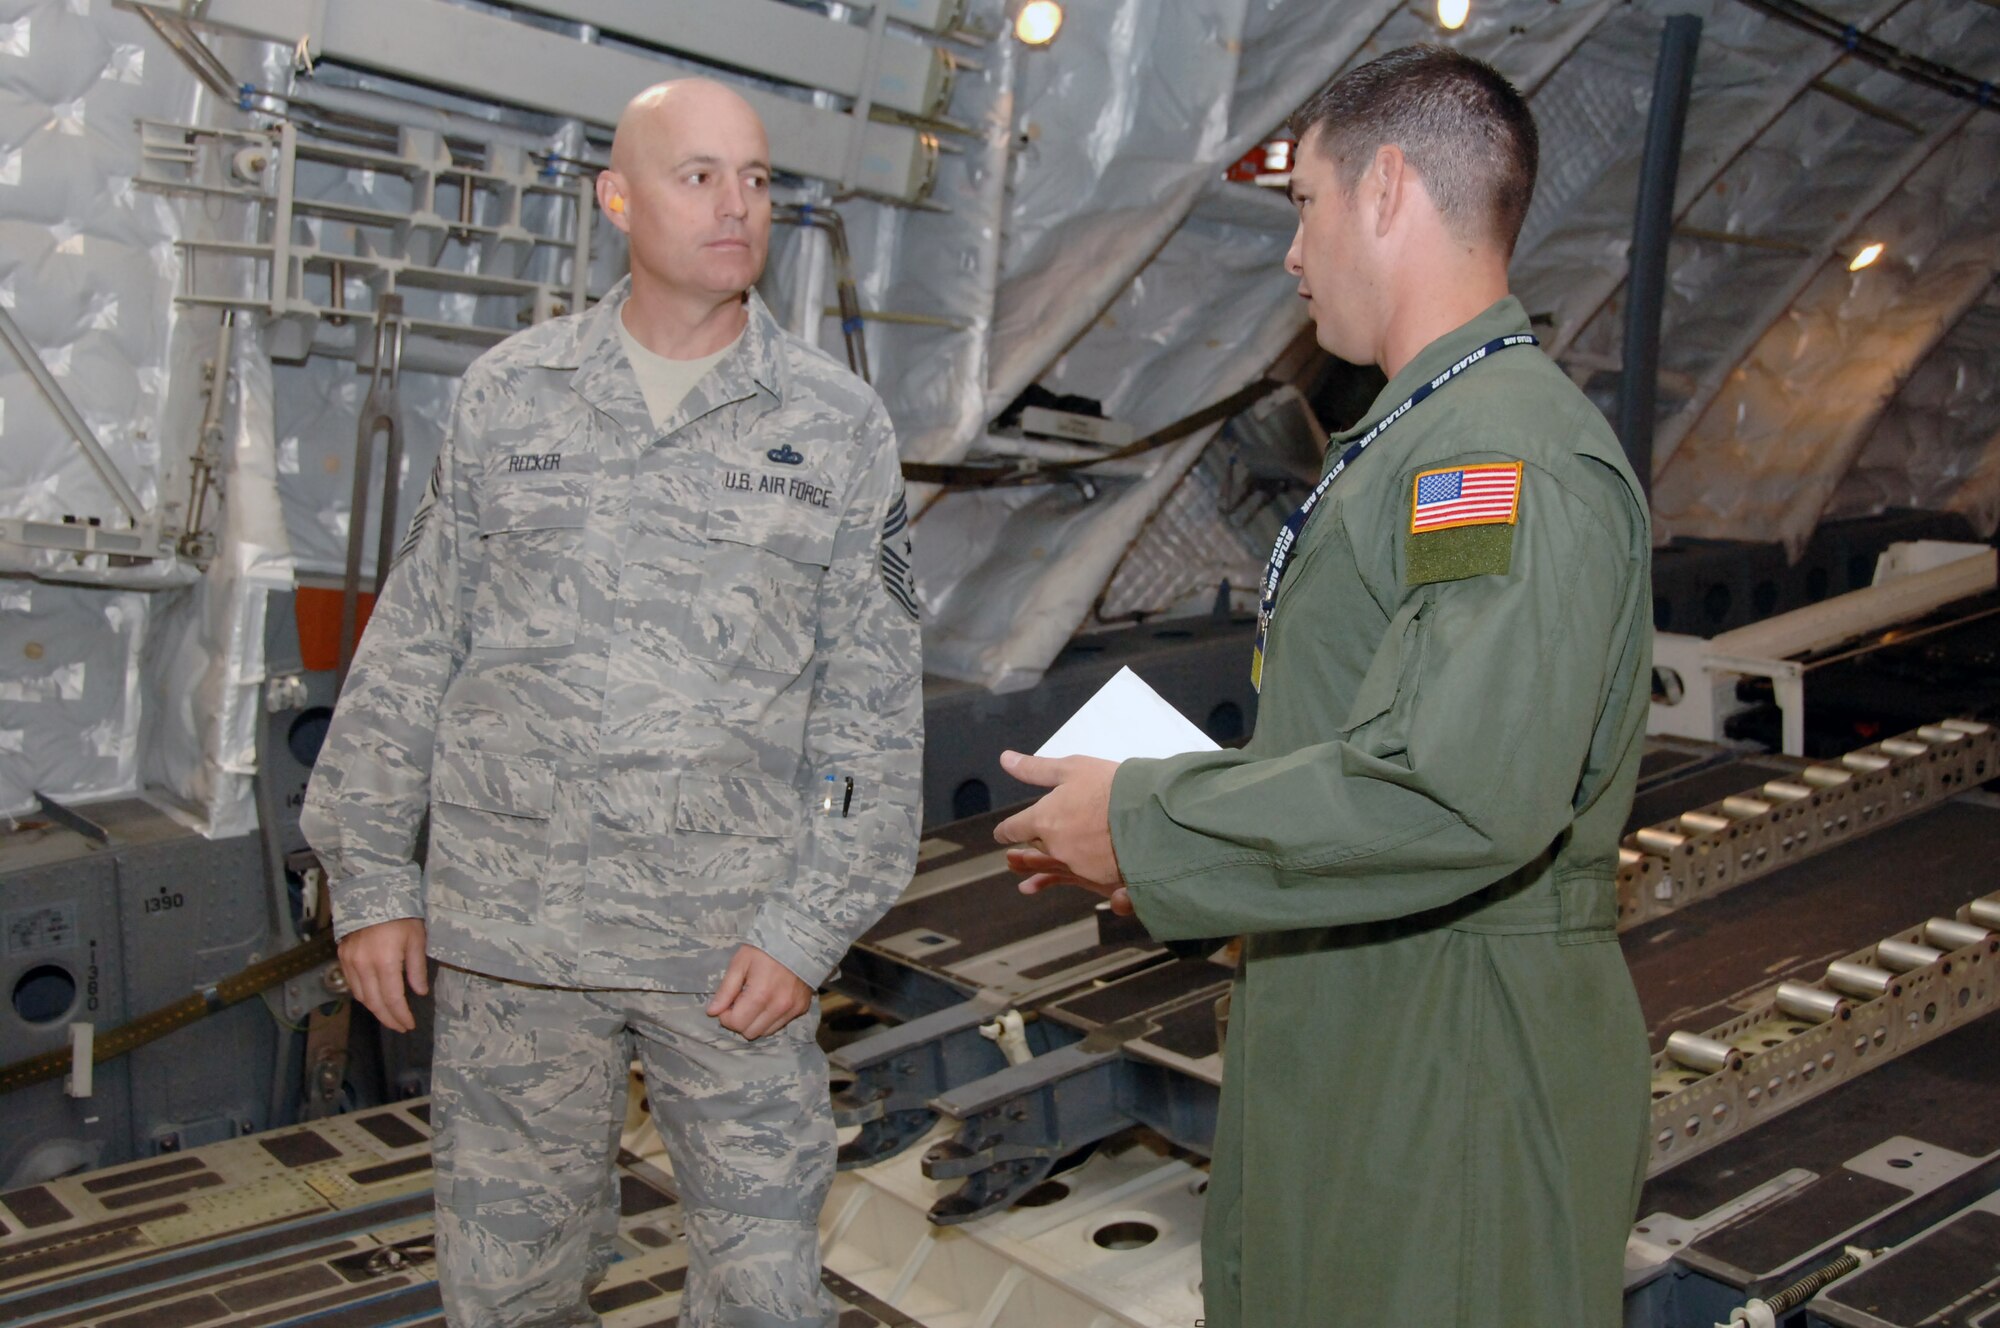 Chief Master Sgt. Craig Recker, 15th Air Wing command chief, talks with Master Sgt. Chuck Baker, 535th Airlift Squadron loadmaster superintendent, during an orientation flight May 24 at Joint Base Pearl Harbor Hickam, Hi. The orientation flight was an opportunity for Air Force, Navy, and Air National Guard leaders to get a better understanding of each other's needs and capabilities. (U.S. Air Force photo by Senior Airman Nathan Allen)